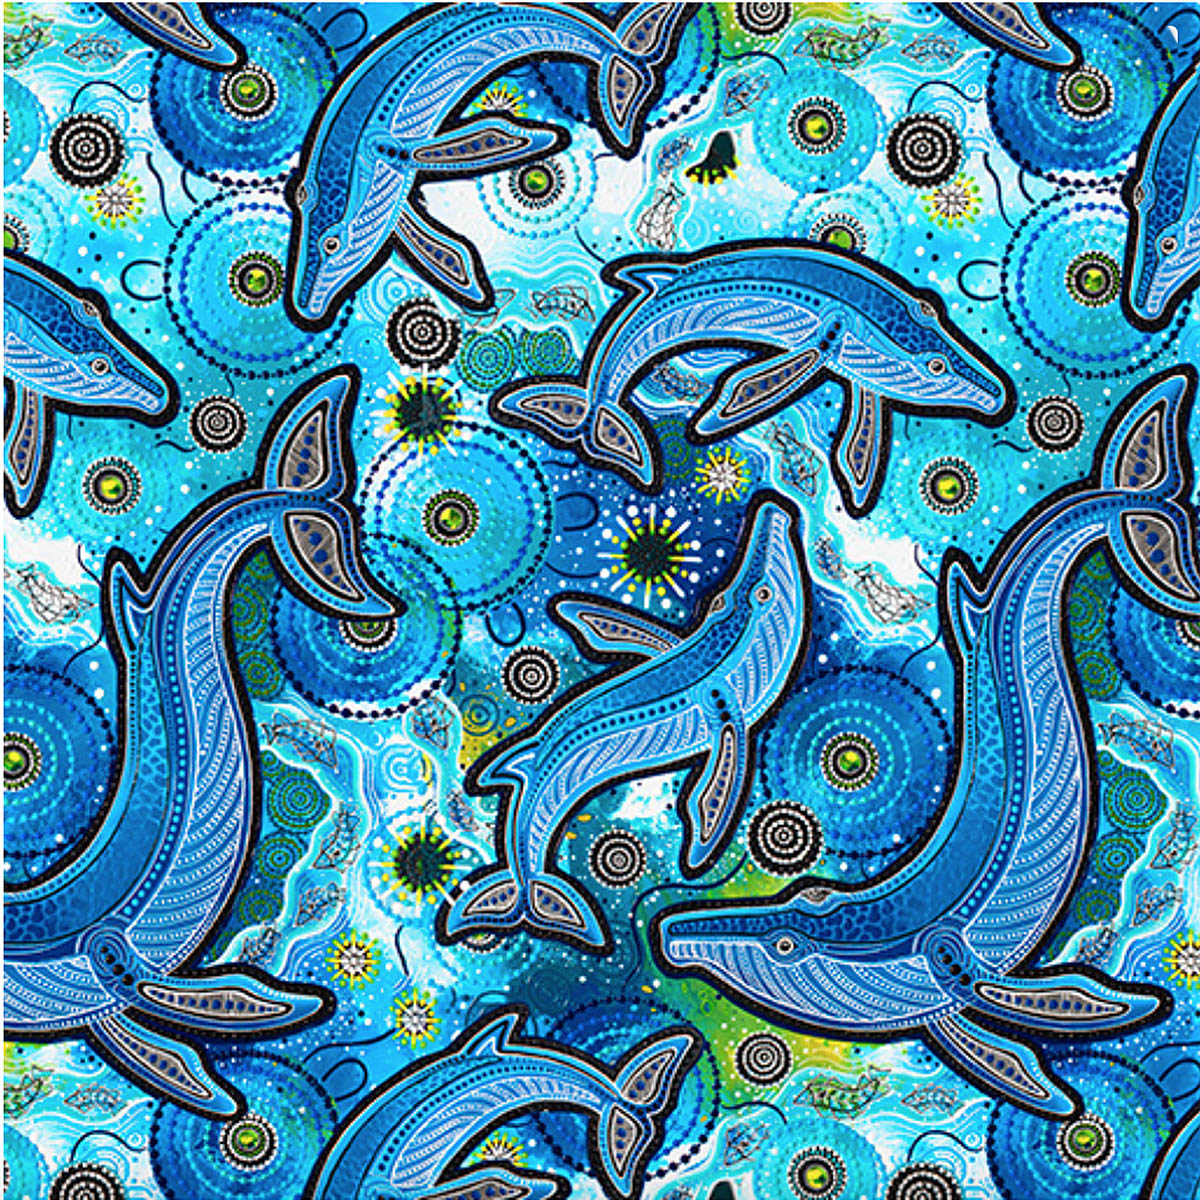 Whales Yuan Thirrin - by Aboriginal artists Chern'ee, Brooke and Jessee Sutton